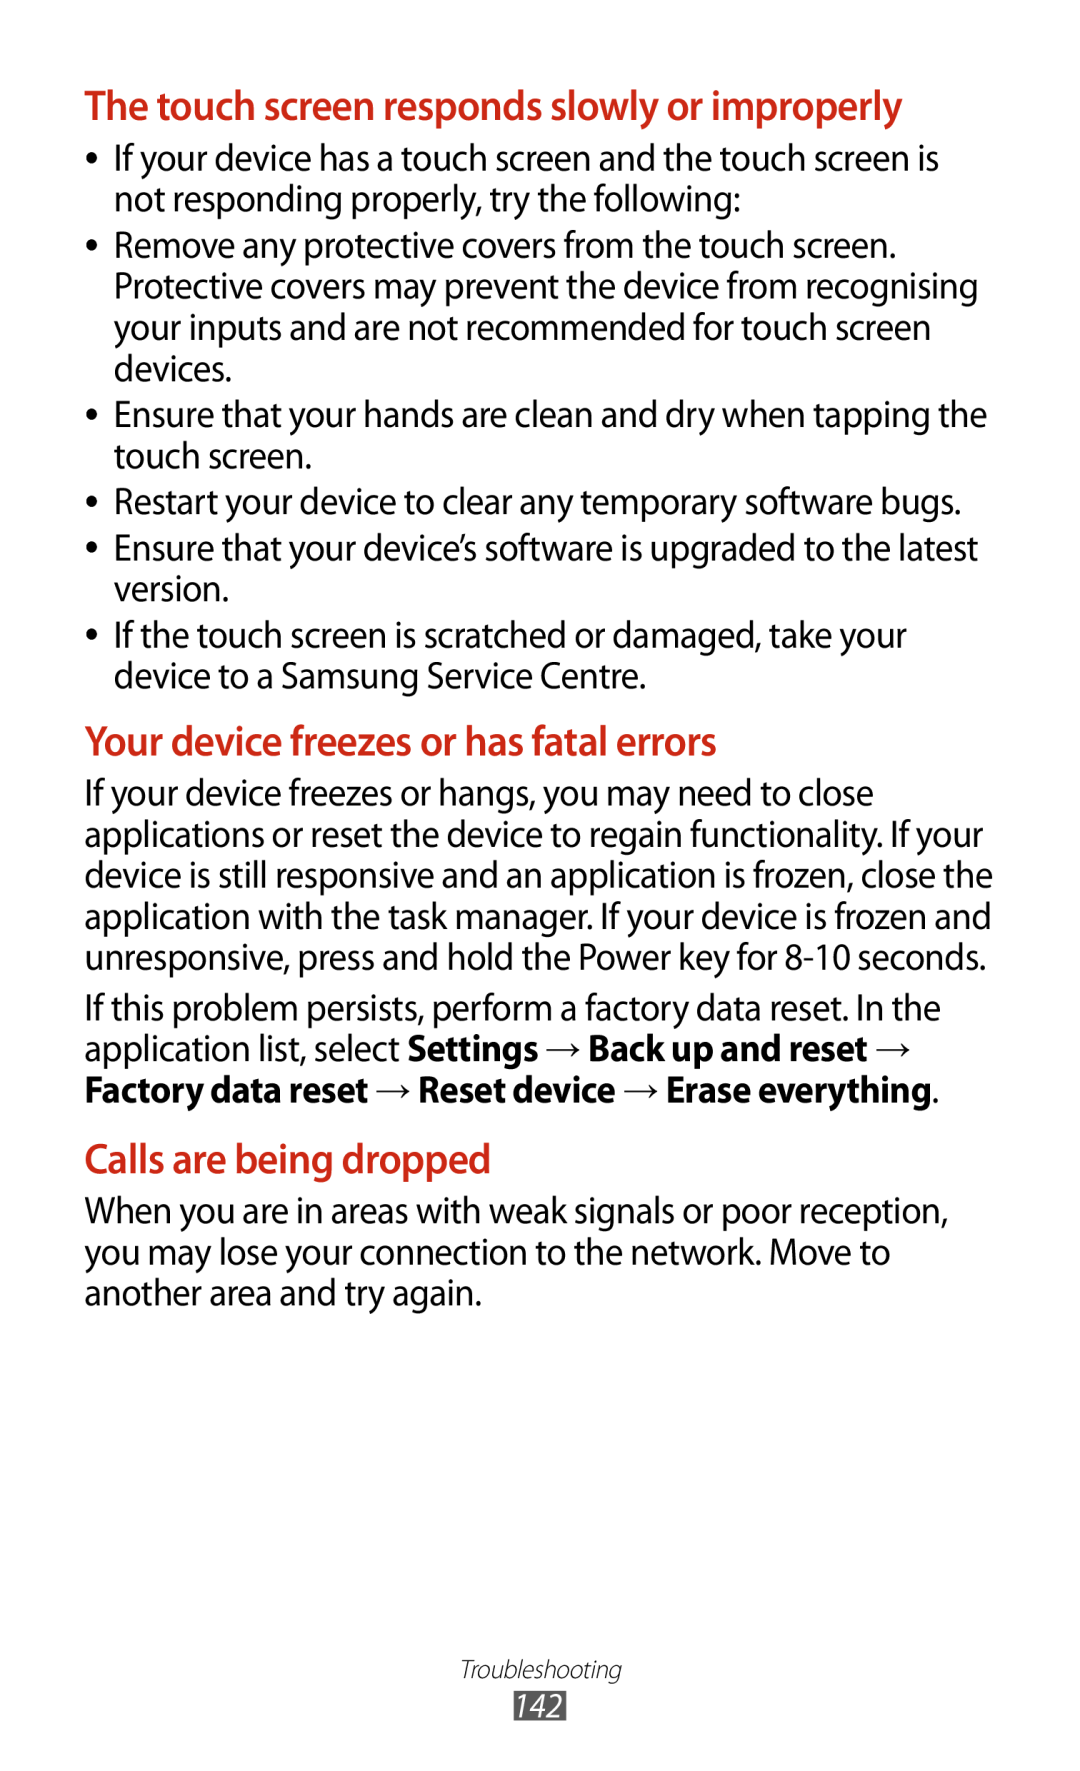 Samsung GT-S7560UWAVDR, GT-S7560ZKAVDR, GT-S7560ZKAPRT Your device freezes or has fatal errors, Calls are being dropped 